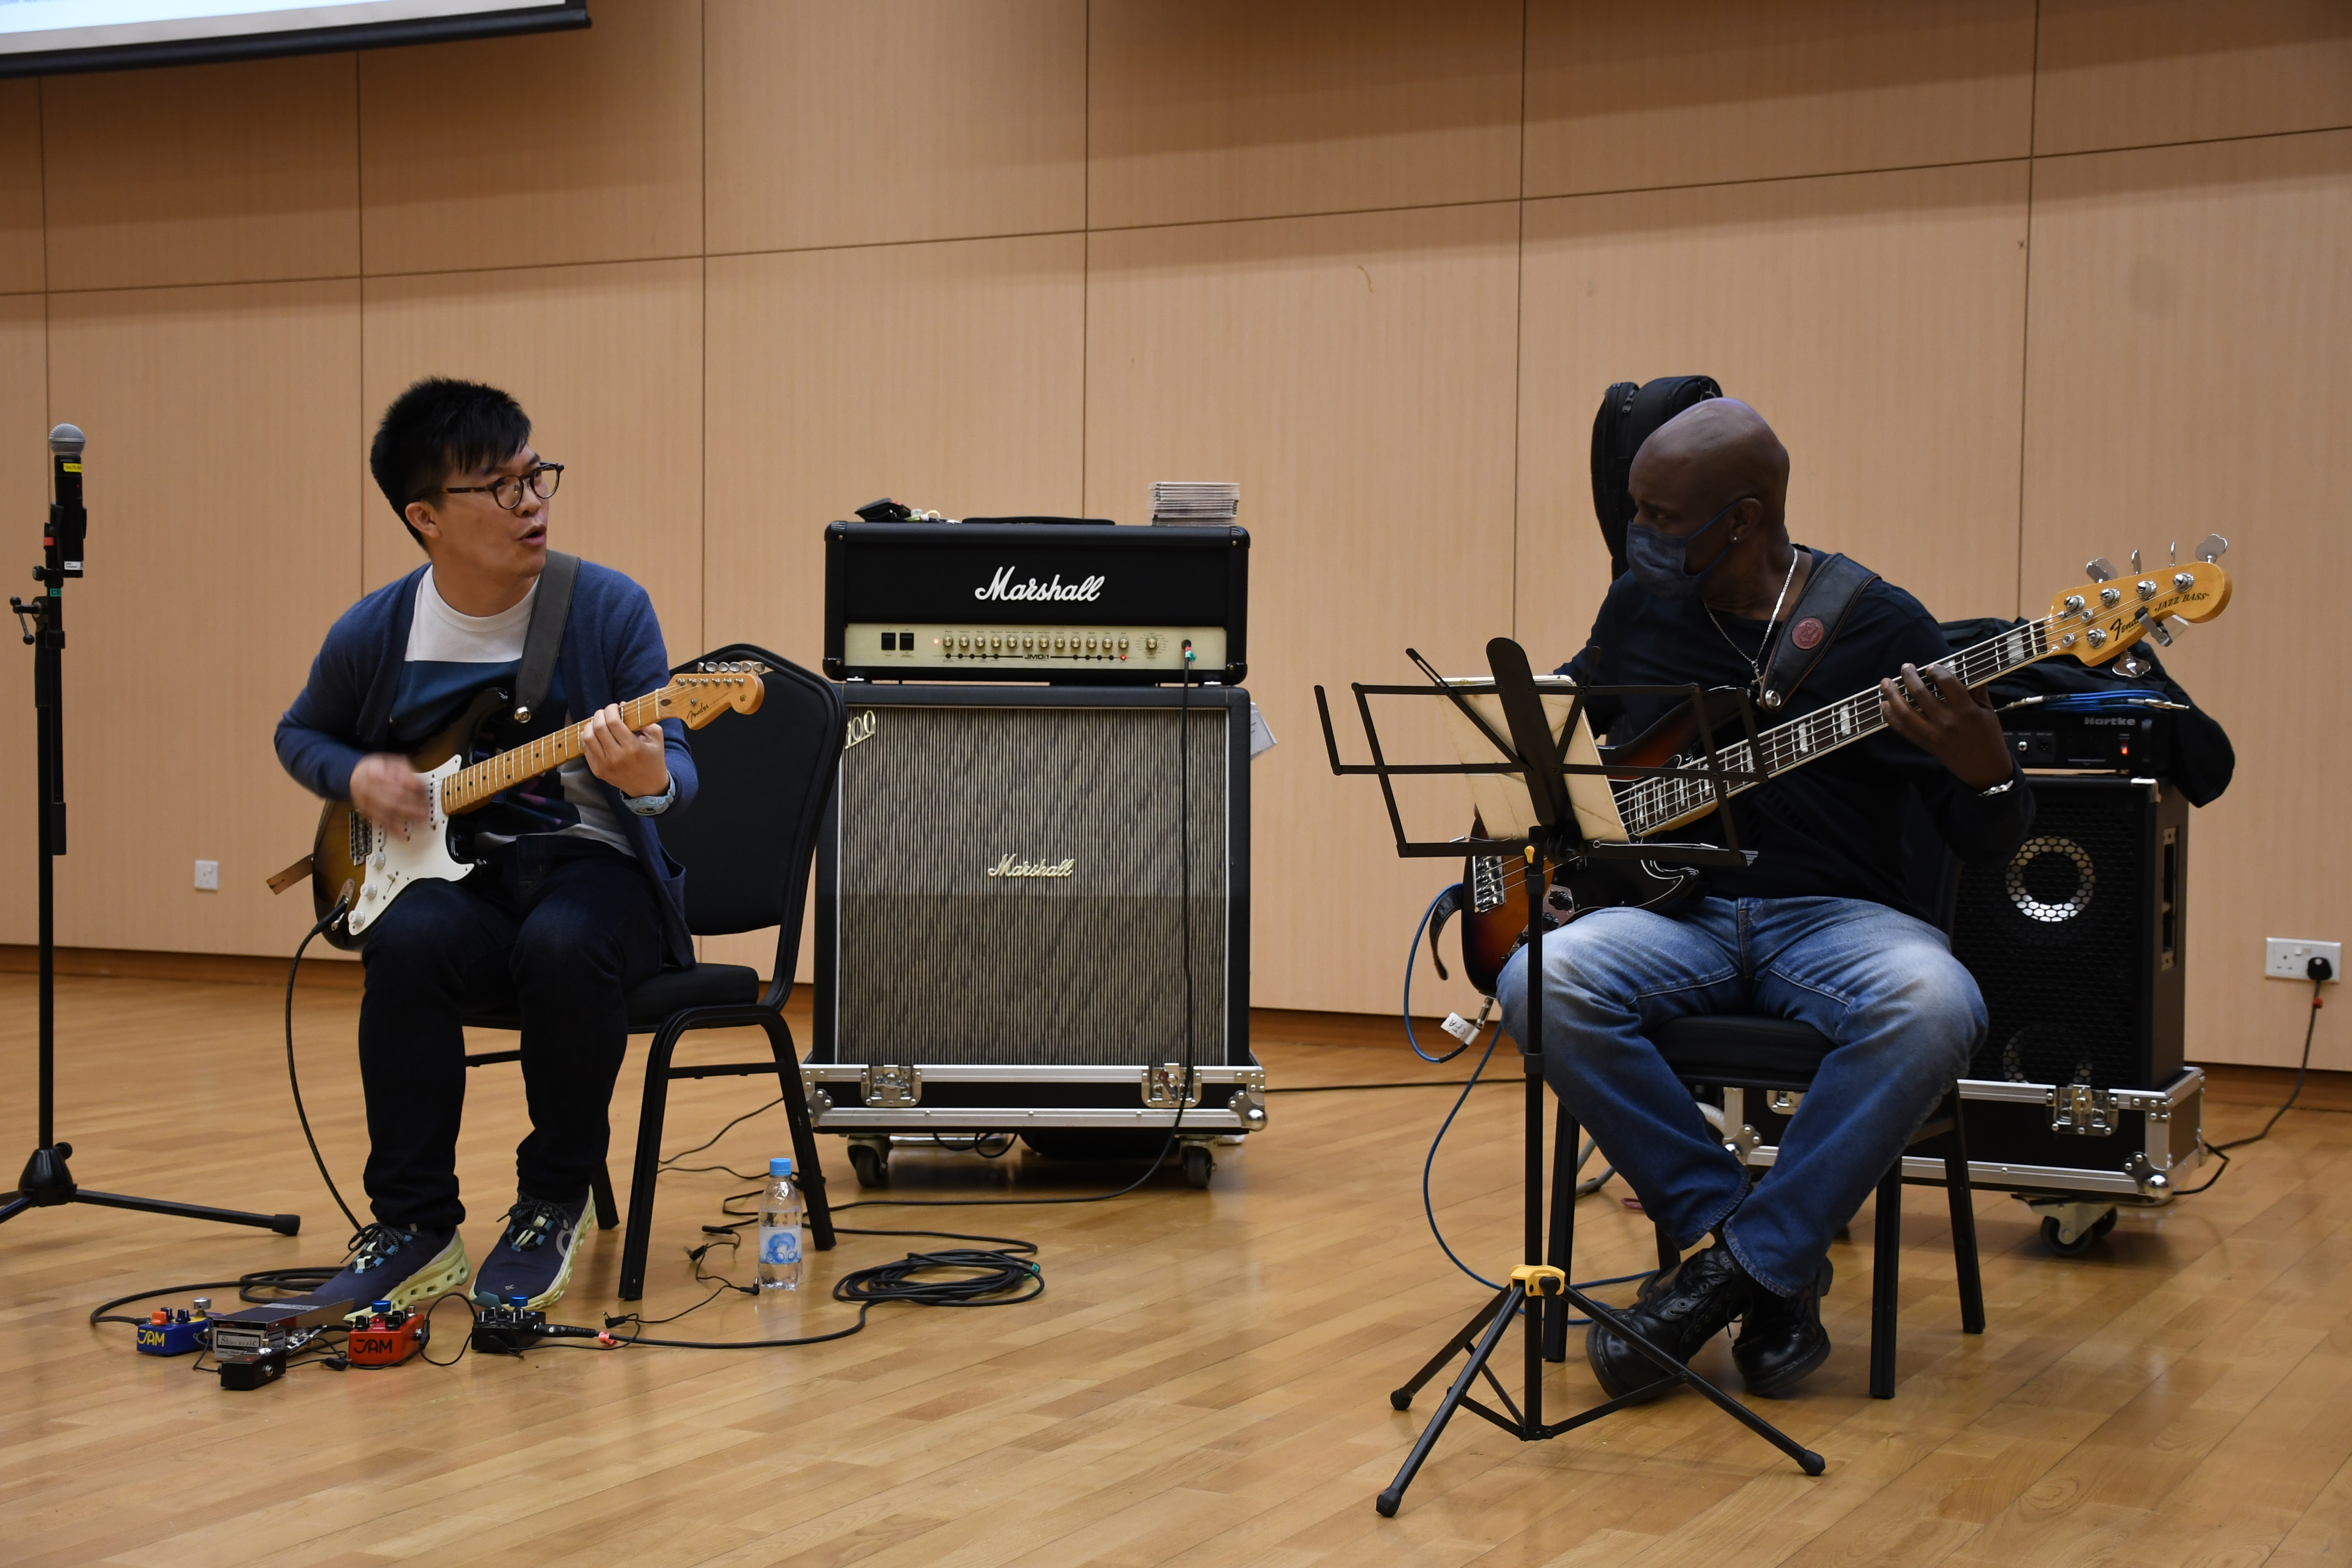 HKUST Arts Festival 2023 - Jazz Talk & Demo: Between Now And Never by Invisible Architecture   